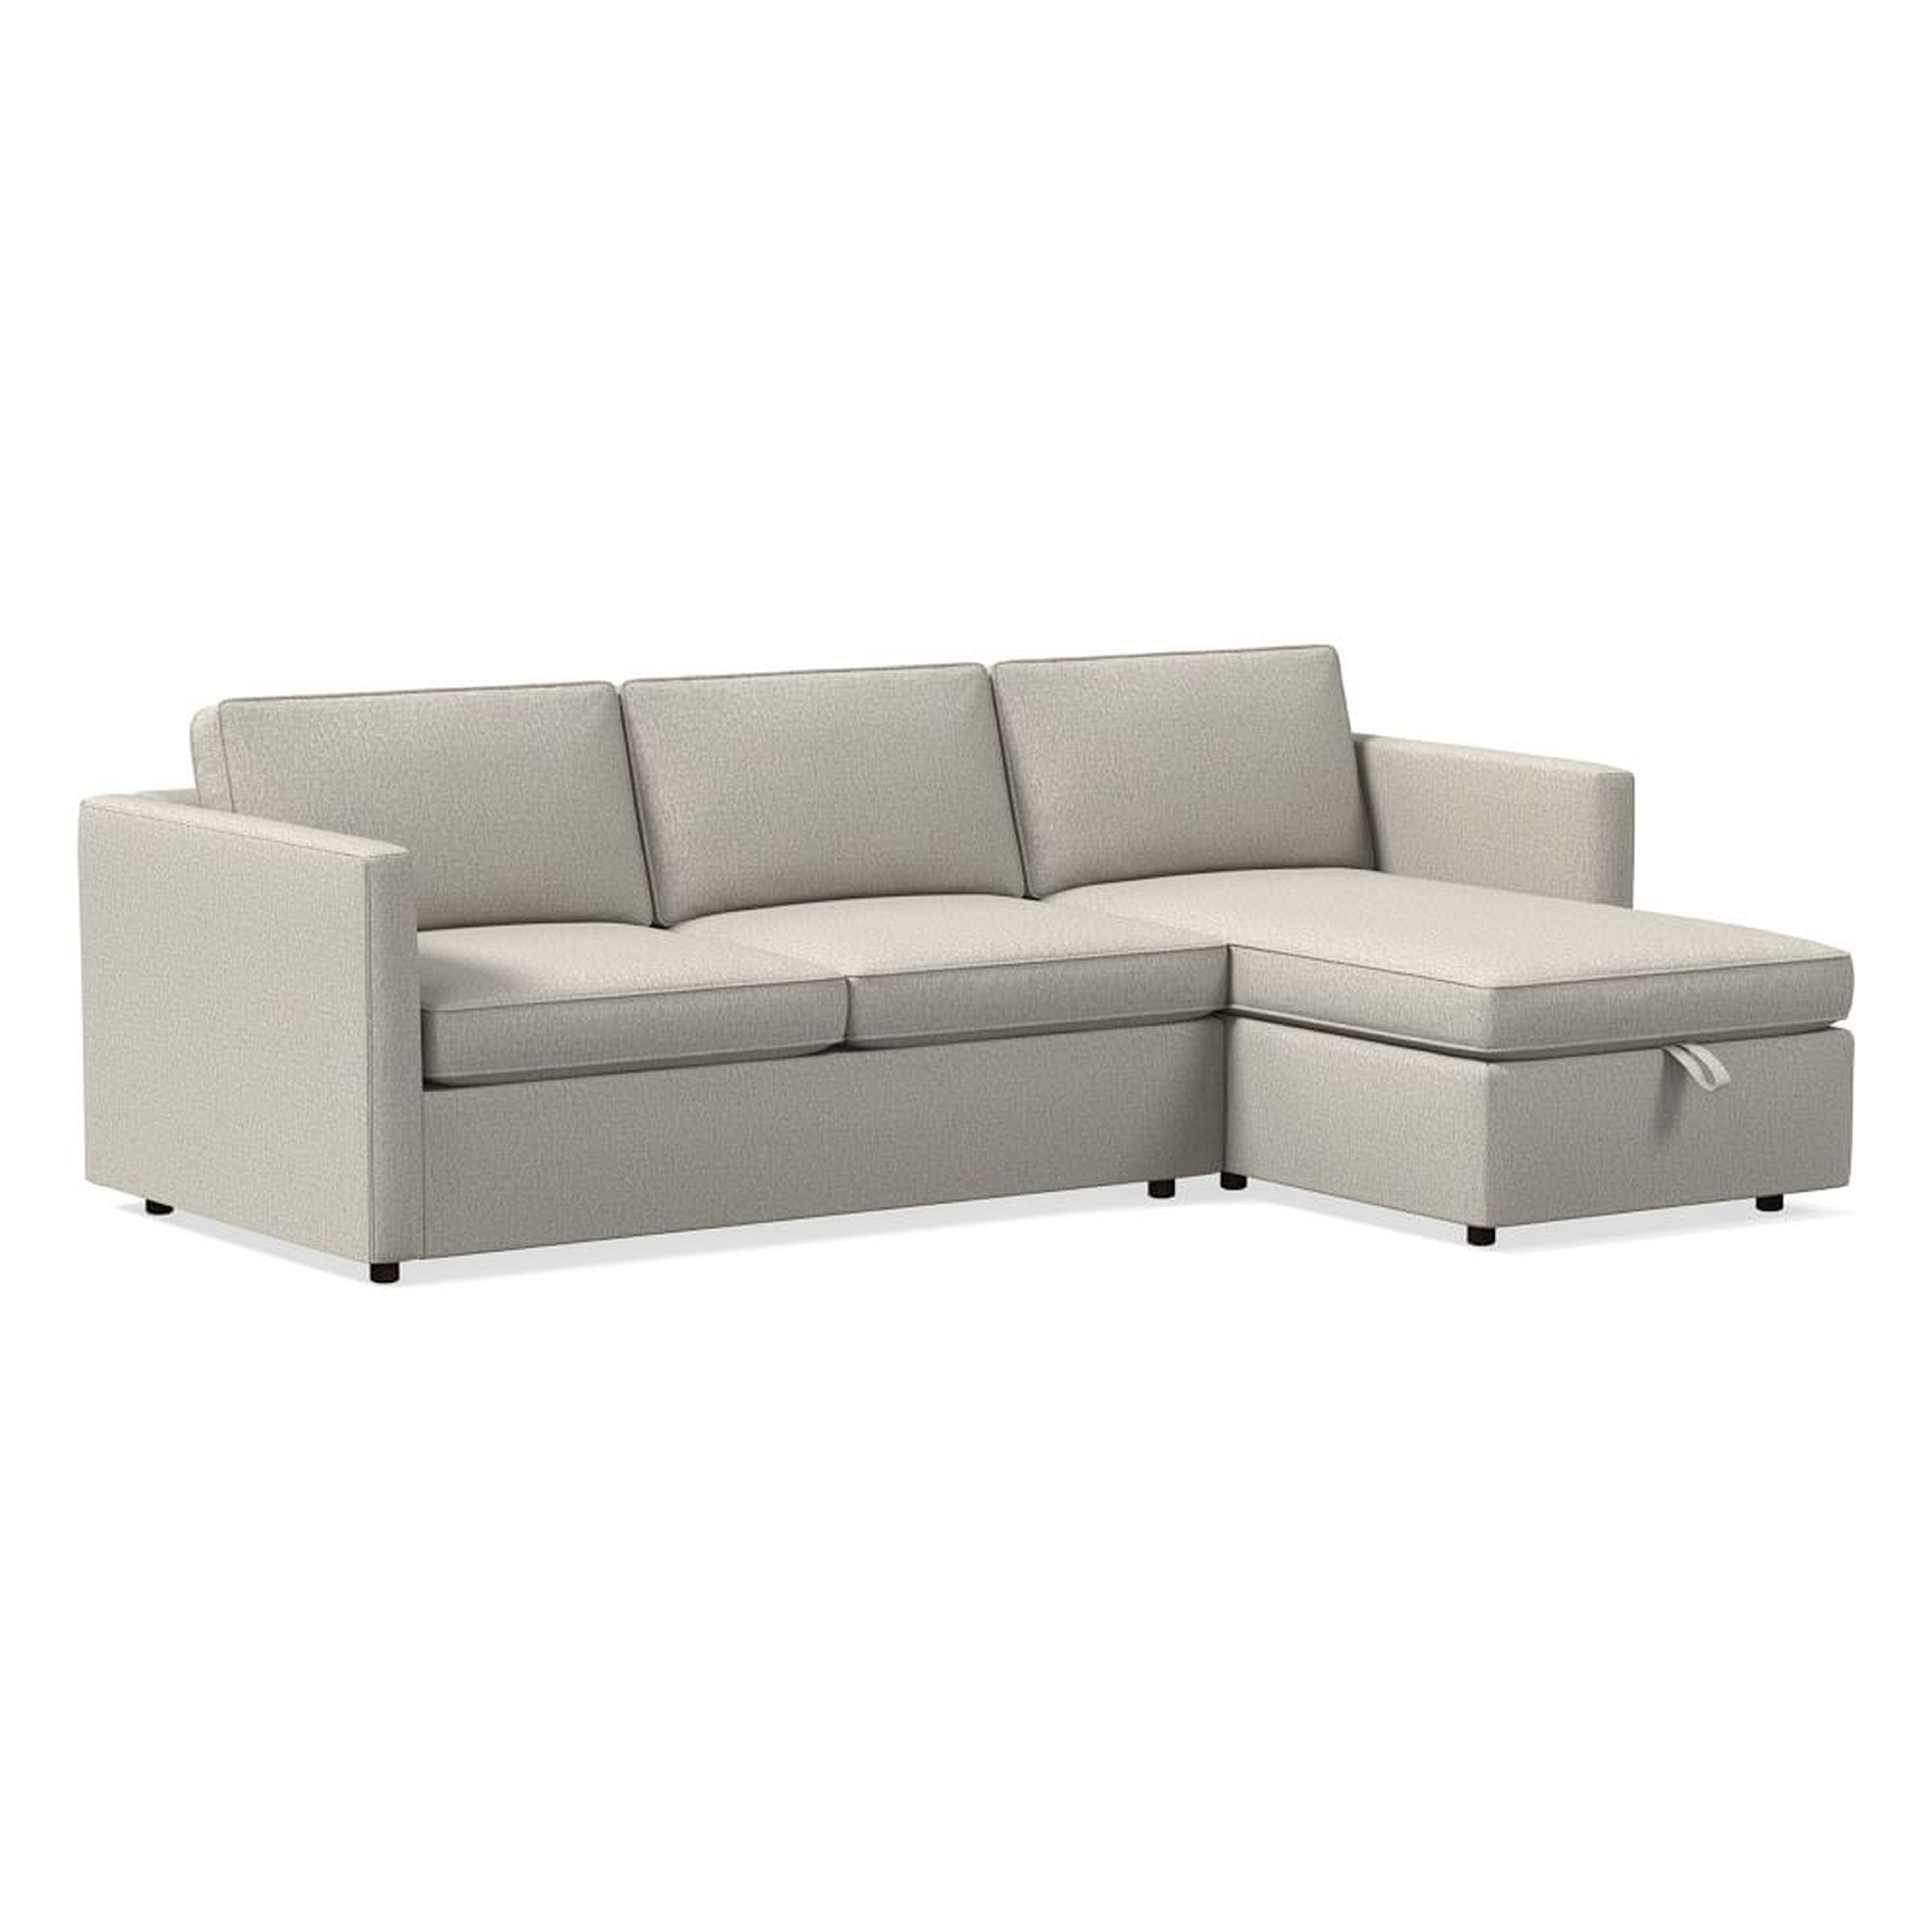 Harris Sectional Set 05: LA 65" Sofa, RA Storage Chaise, Poly , Twill, Dove, Concealed Supports - West Elm